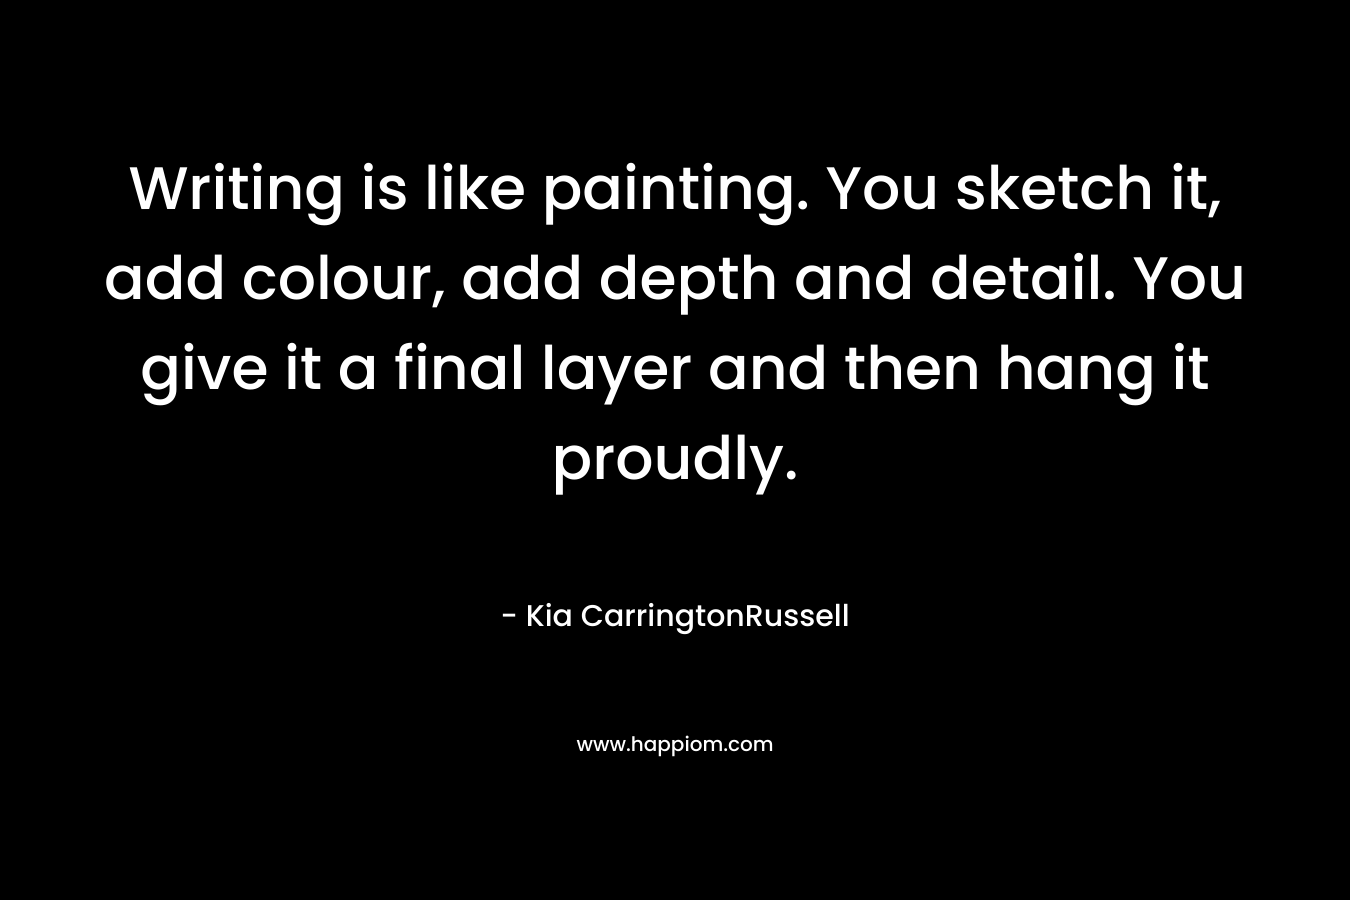 Writing is like painting. You sketch it, add colour, add depth and detail. You give it a final layer and then hang it proudly. – Kia CarringtonRussell